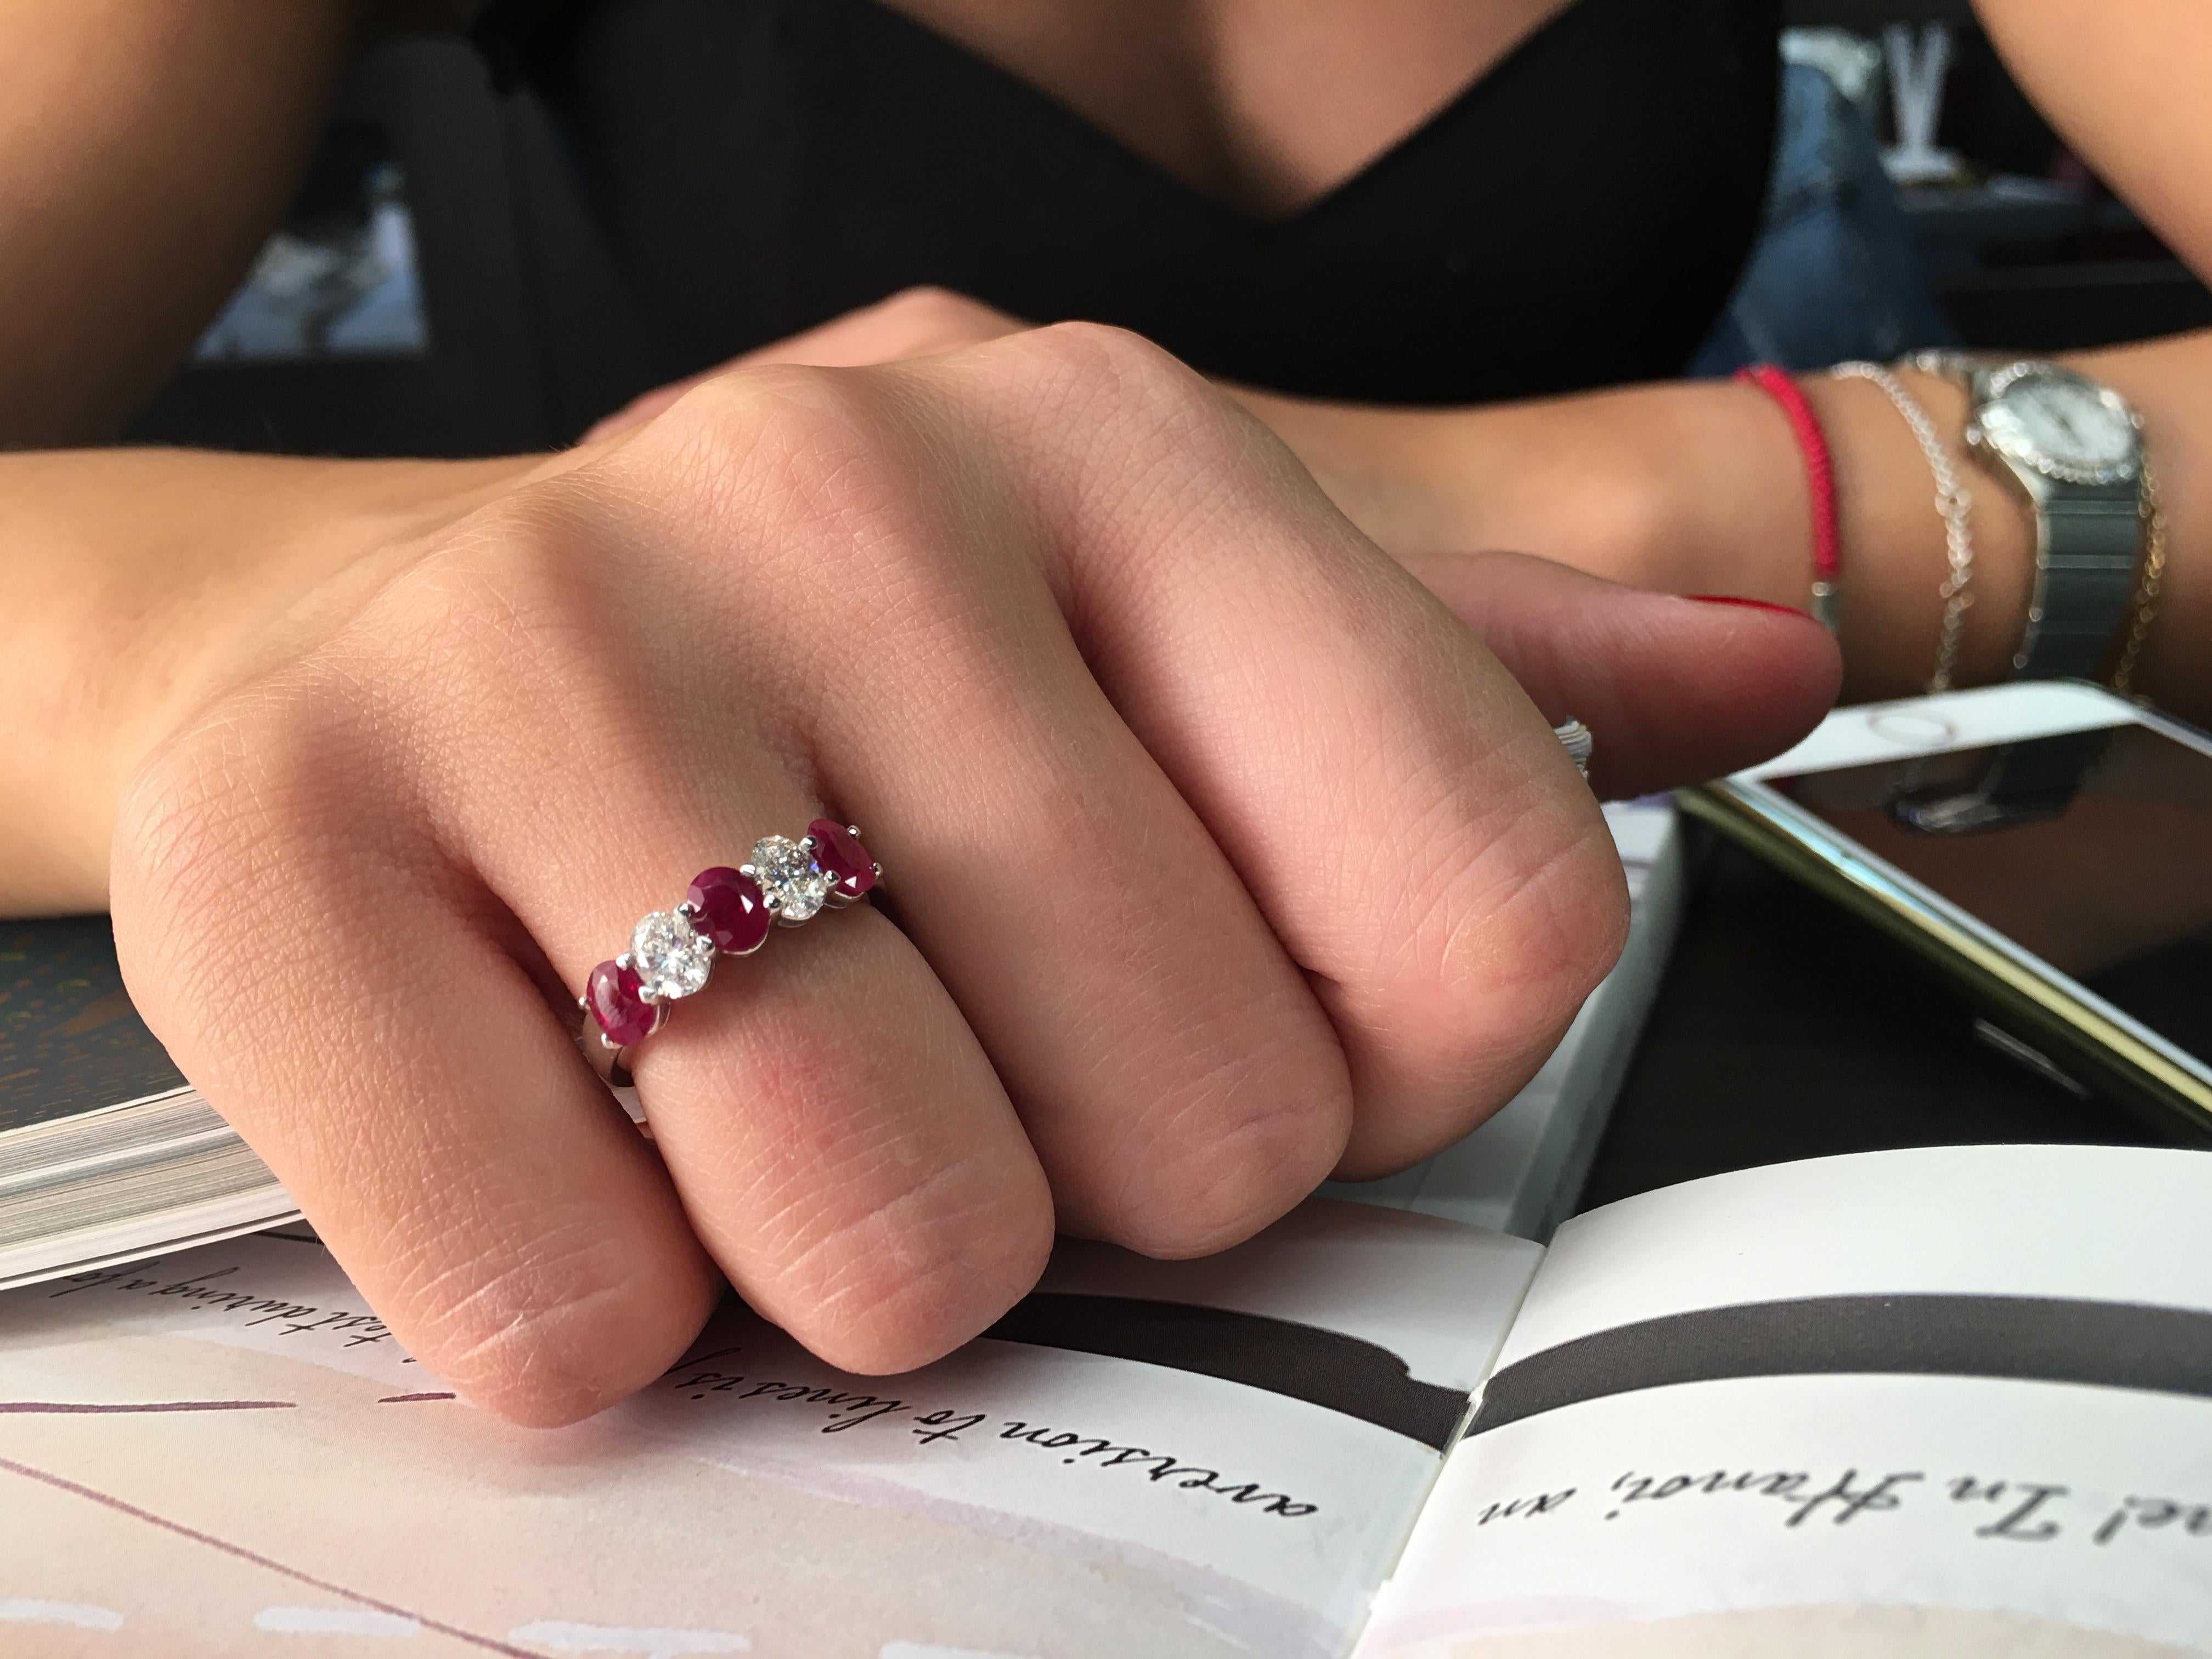 Diamond and ruby anniversary ring hand crafted in 18K white gold. Amazing high end quality.
Stunning diamond ruby eternity band crafted in 18K white gold with high end touches and finishes. Something like this will cost a fortune in any name brand